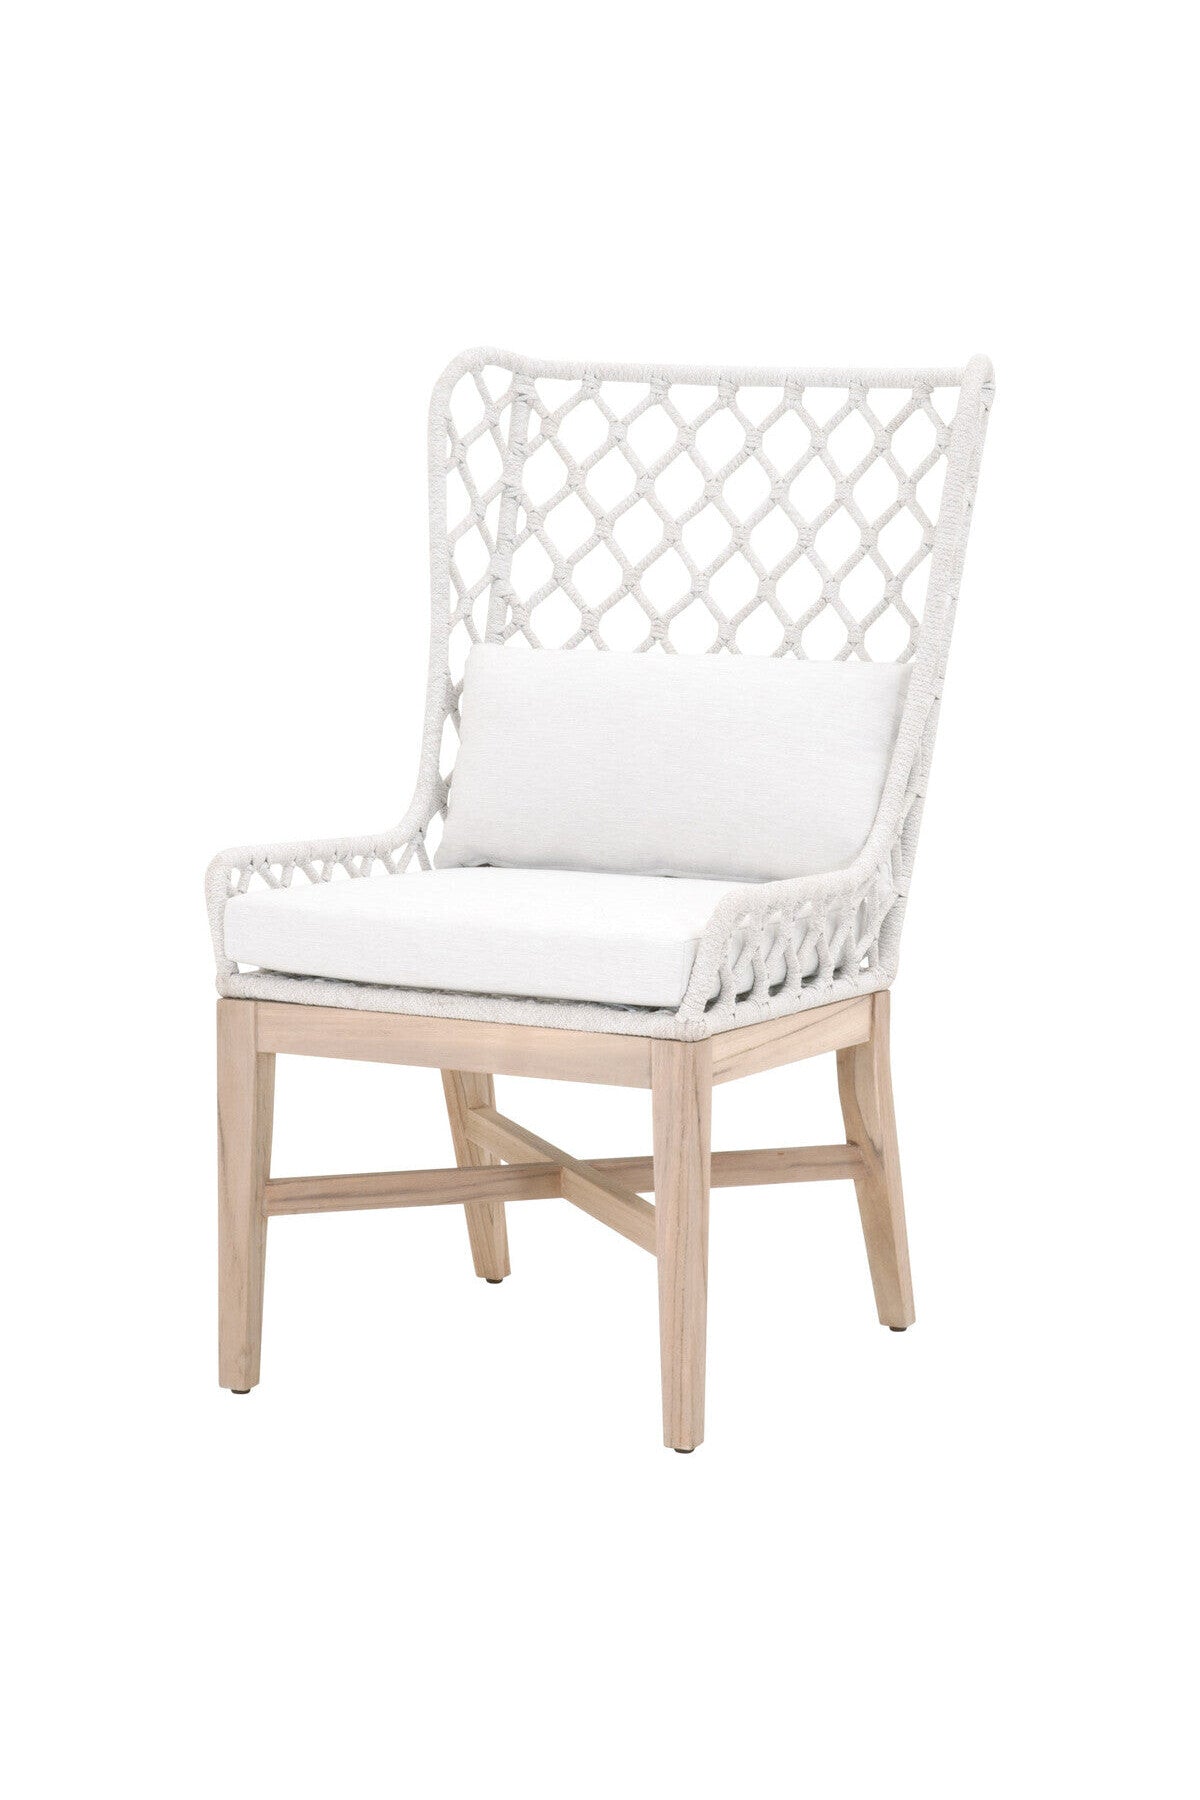 Lacey Outdoor Wing Chair